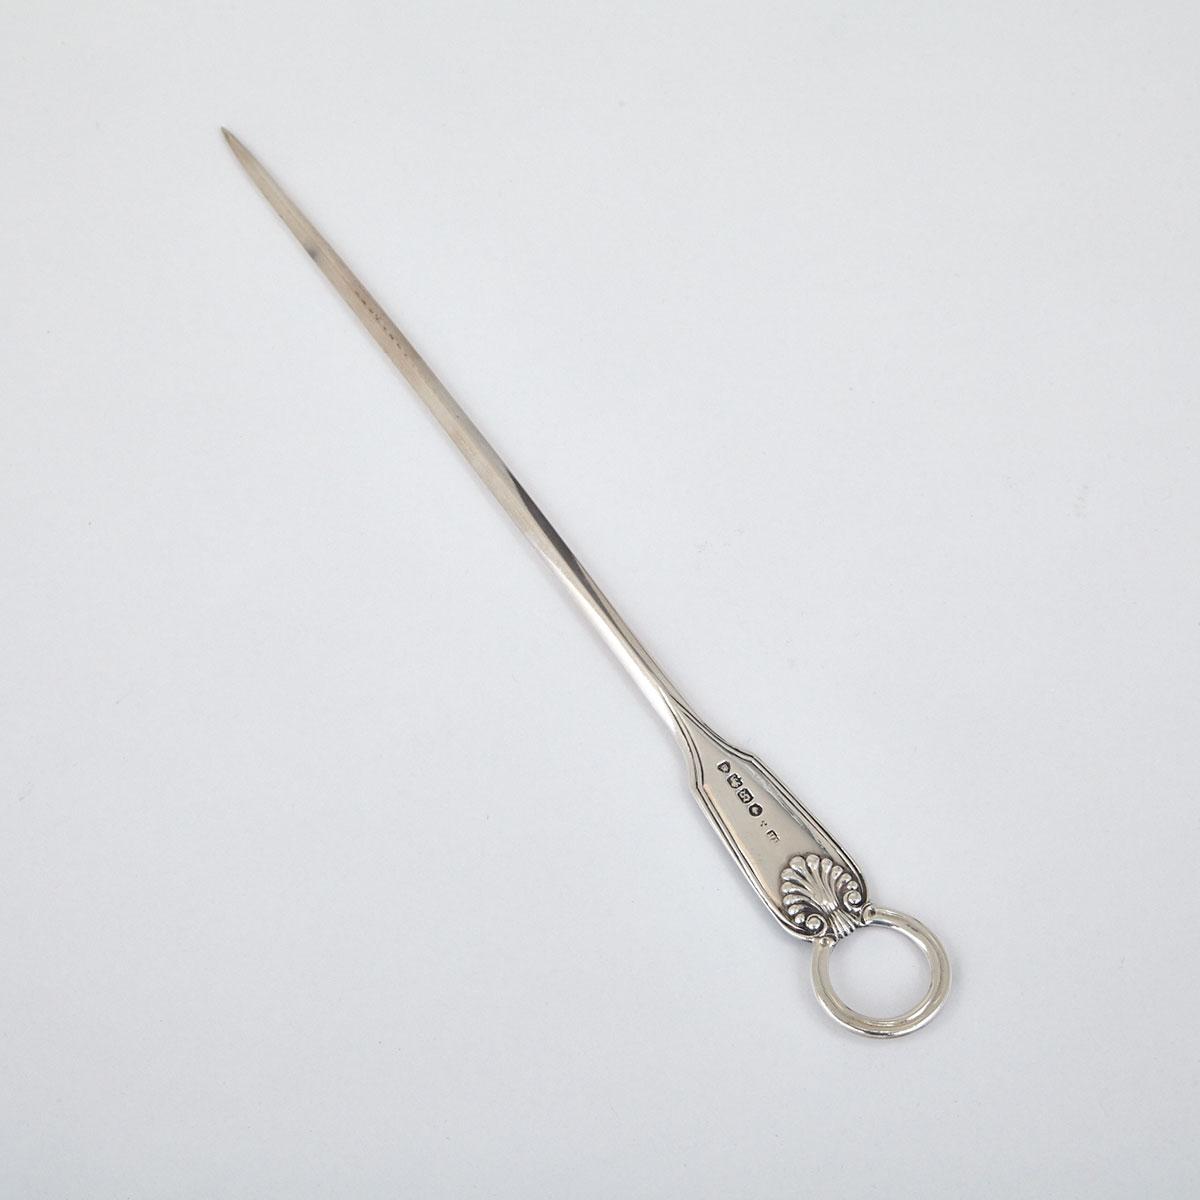 Victorian Silver Fiddle, Thread, and Shell Pattern Meat Skewer, Henry Holland, London, 1873